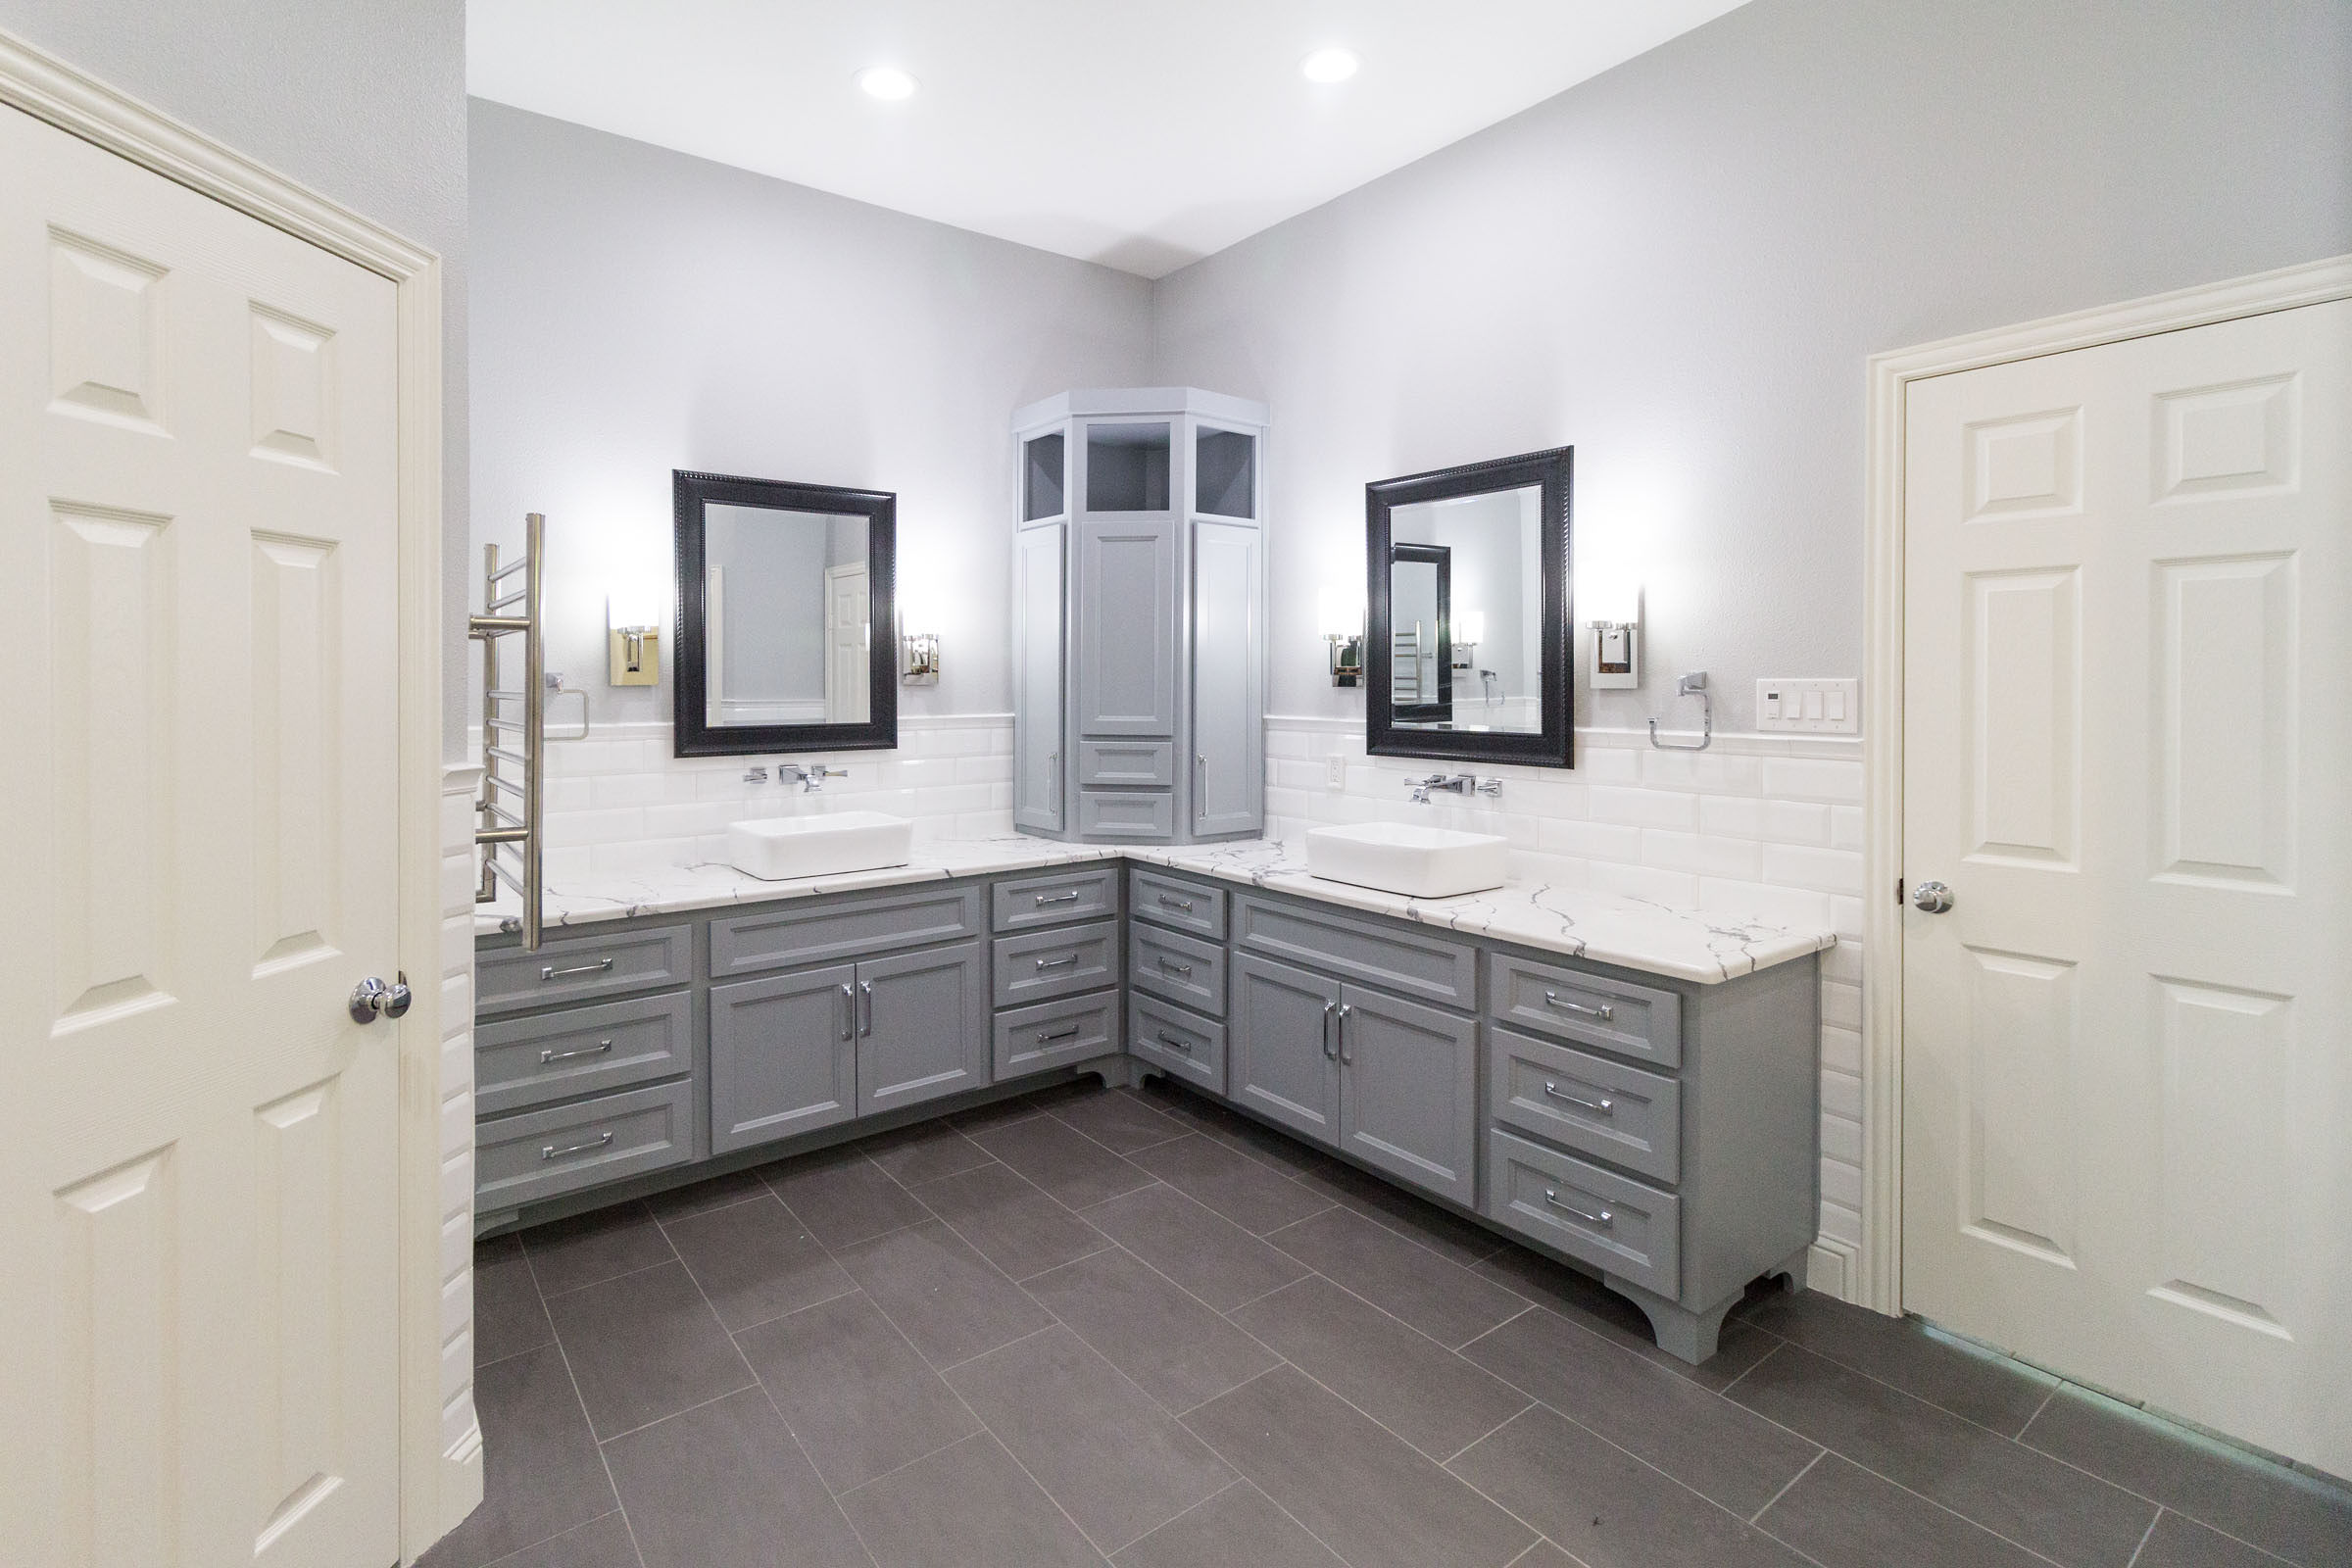 Bathroom remodel with grey and white features, contemporary style, clean and bright